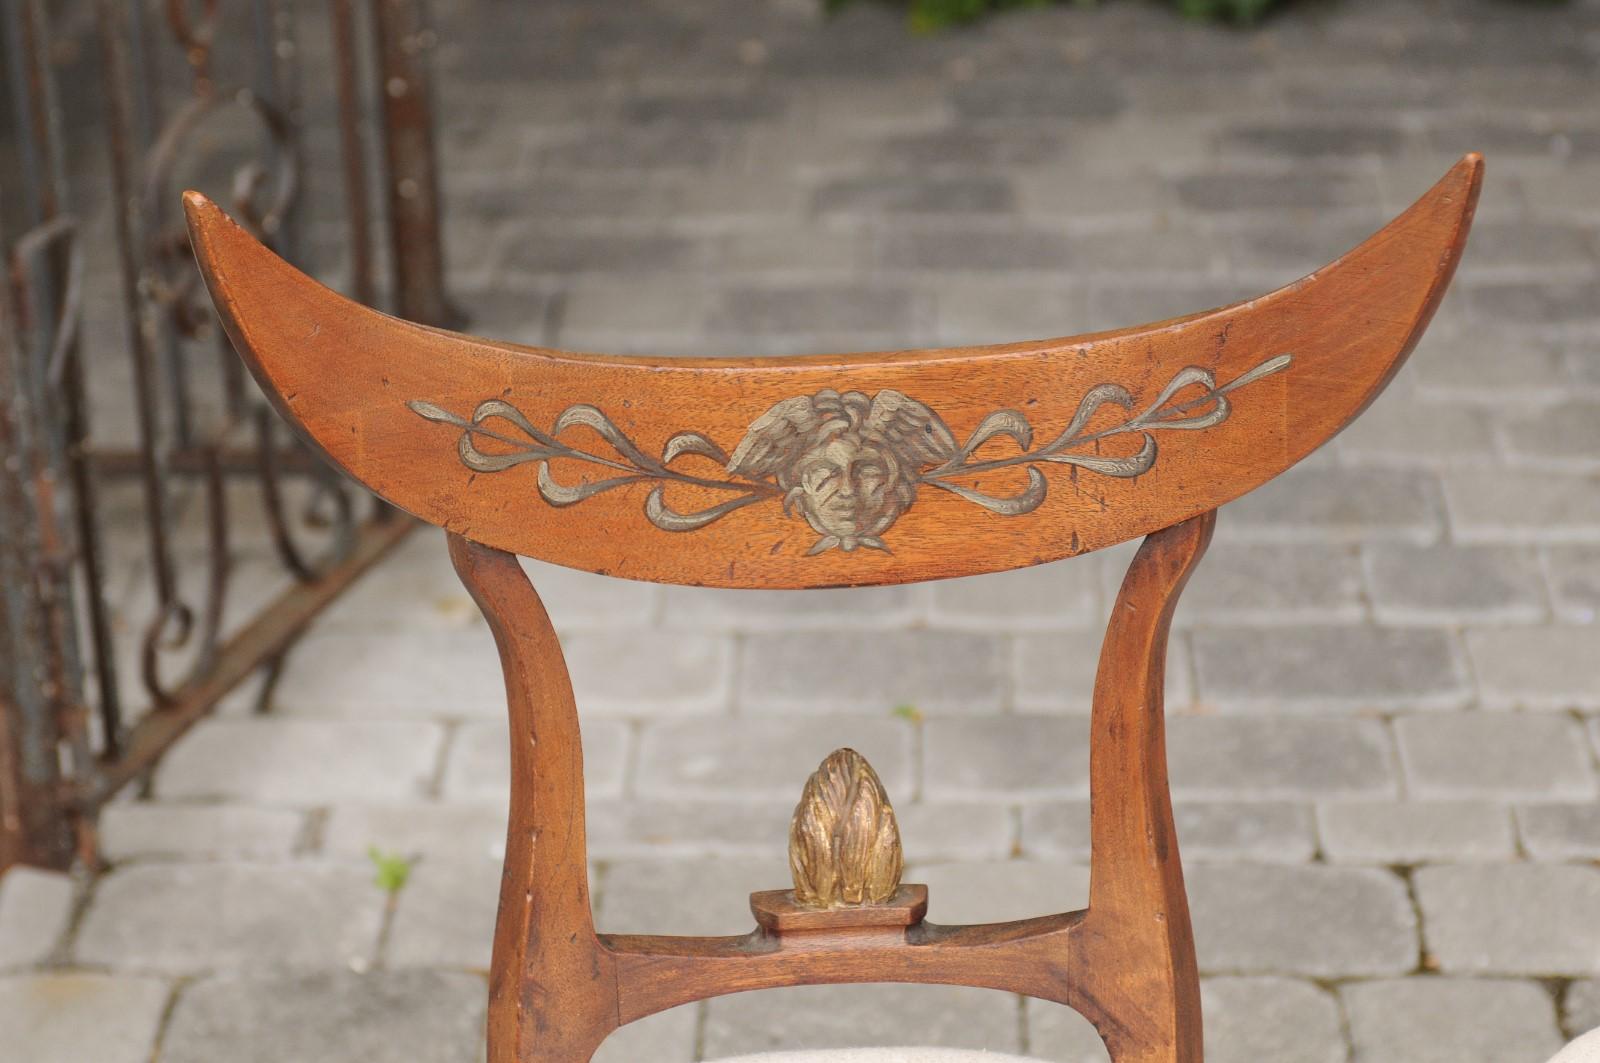 Upholstery Pair of Italian 1860s Upholstered Side Chairs with Crescent Backs and Saber Legs For Sale